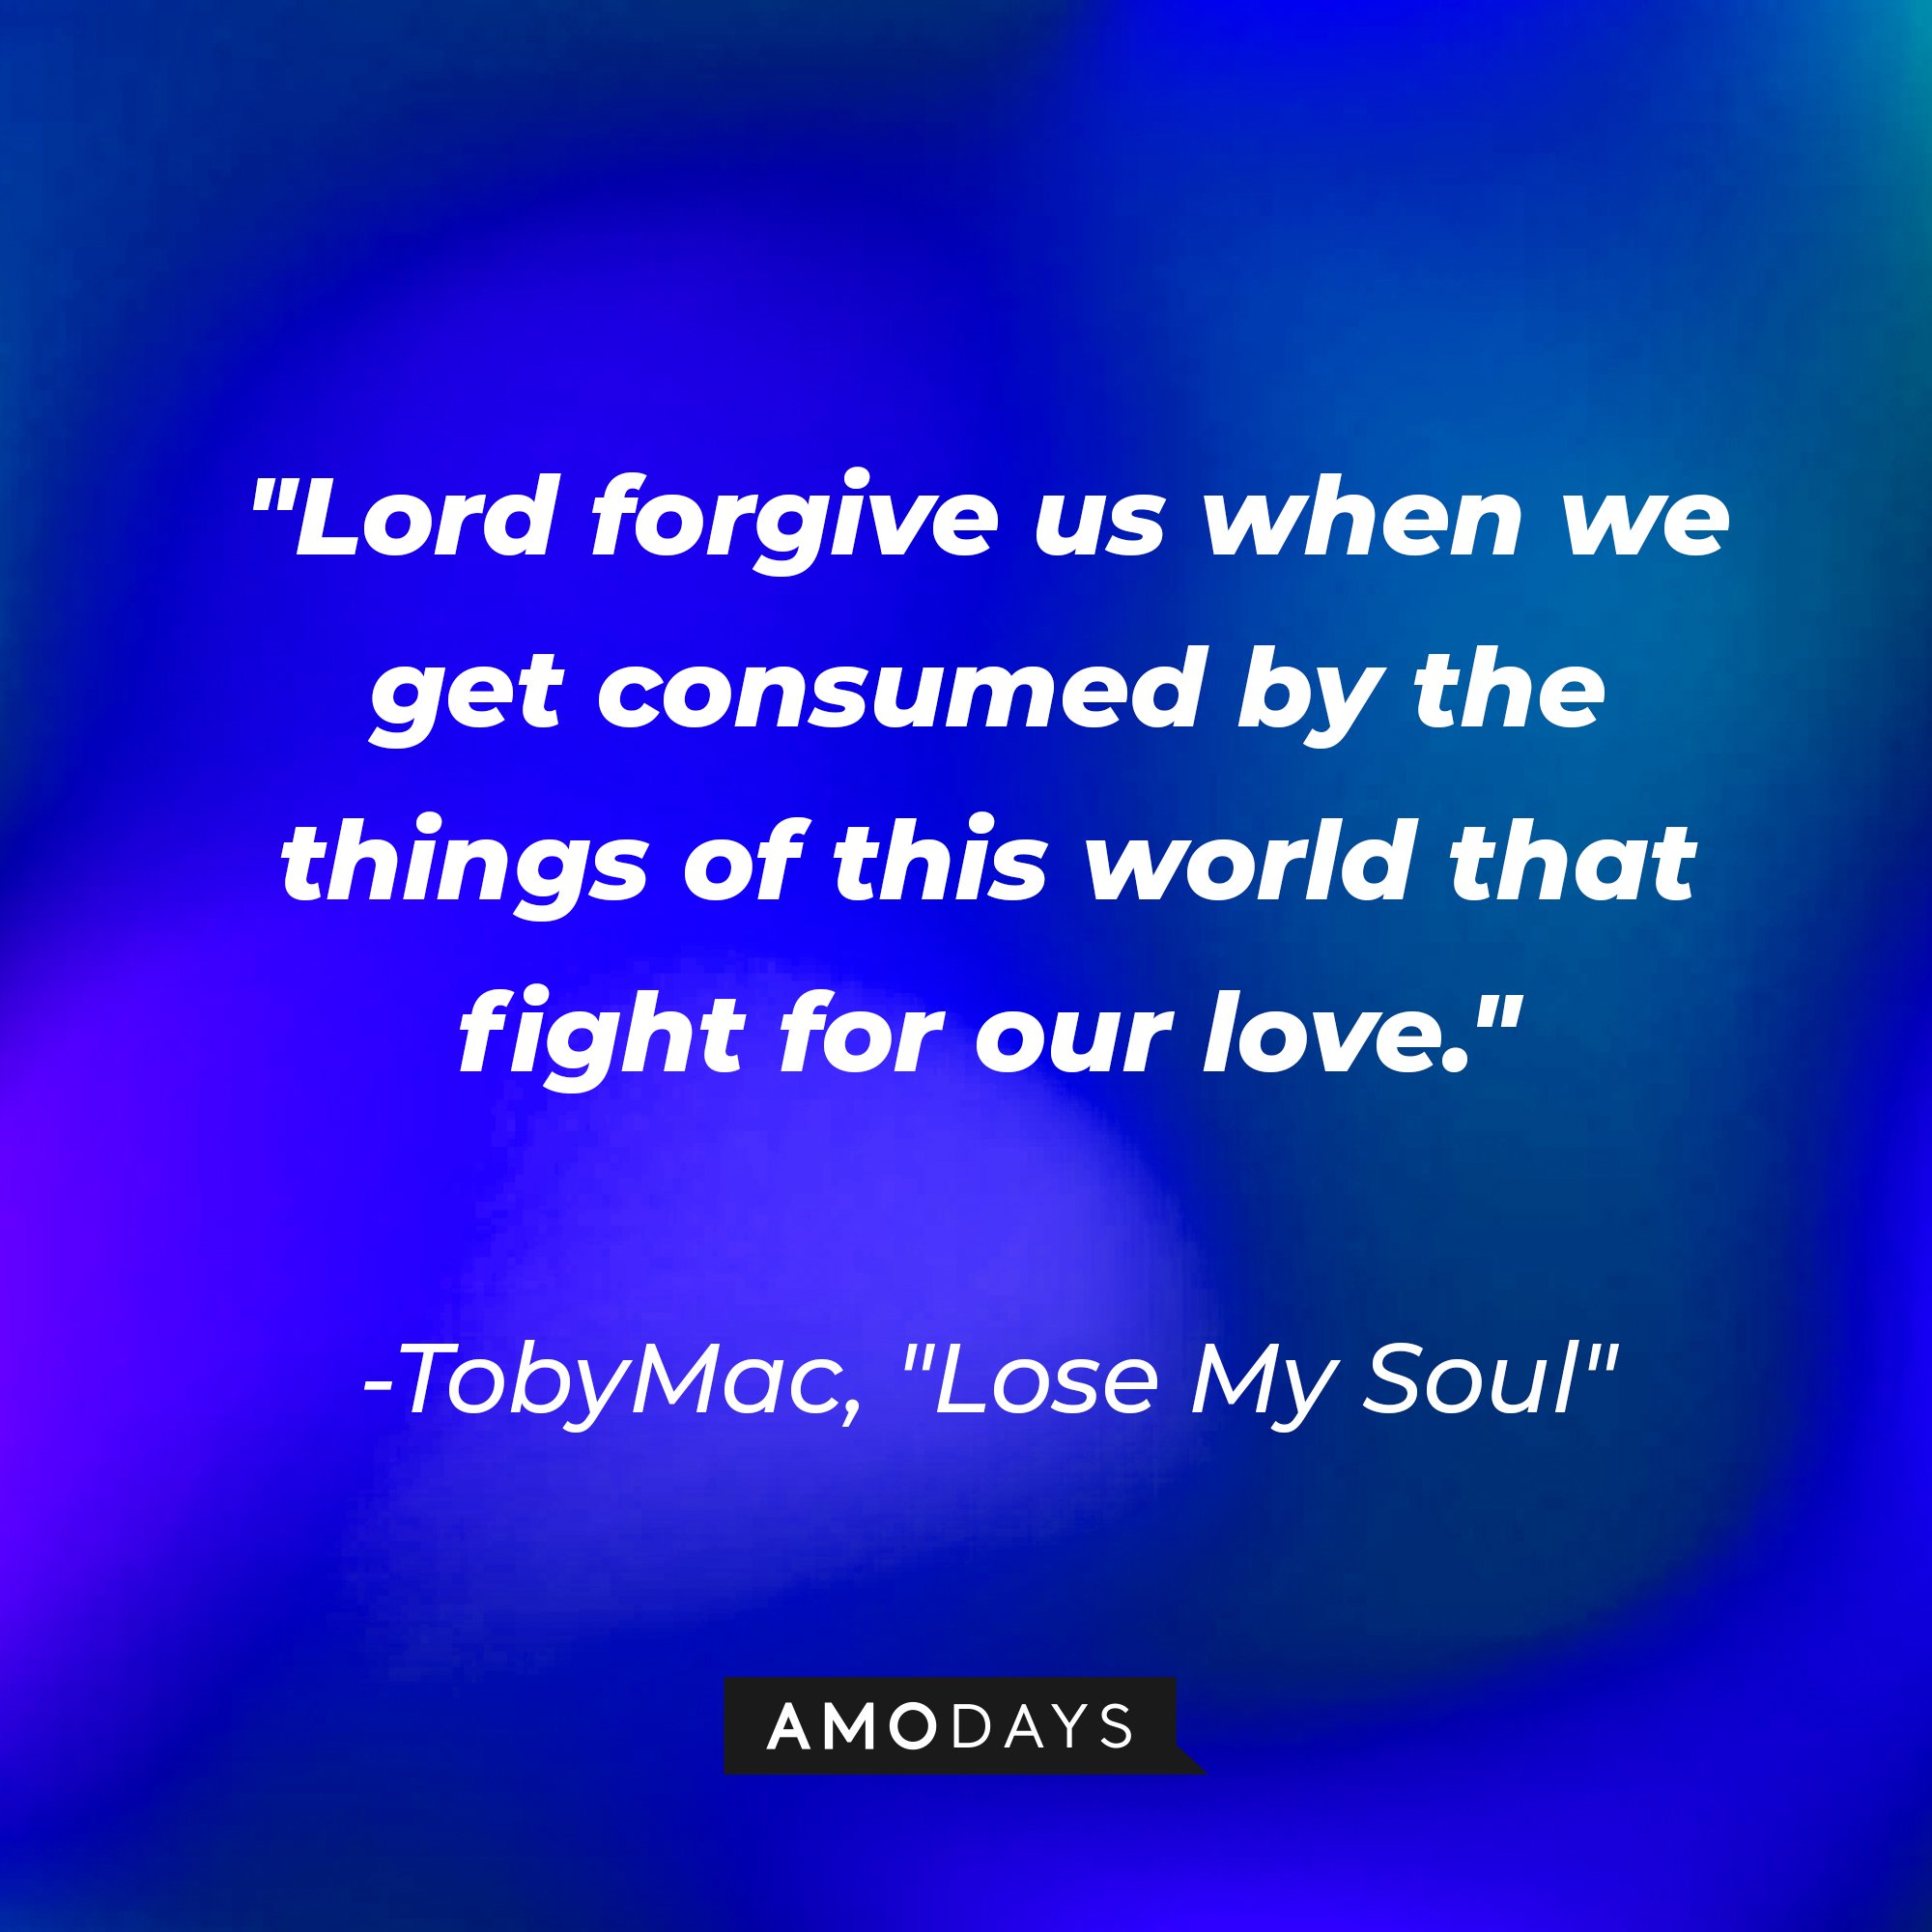 TobyMac's "Lose My Soul" quote: "Lord forgive us when we get consumed by the things of this world that fight for our love." | Image: AmoDays